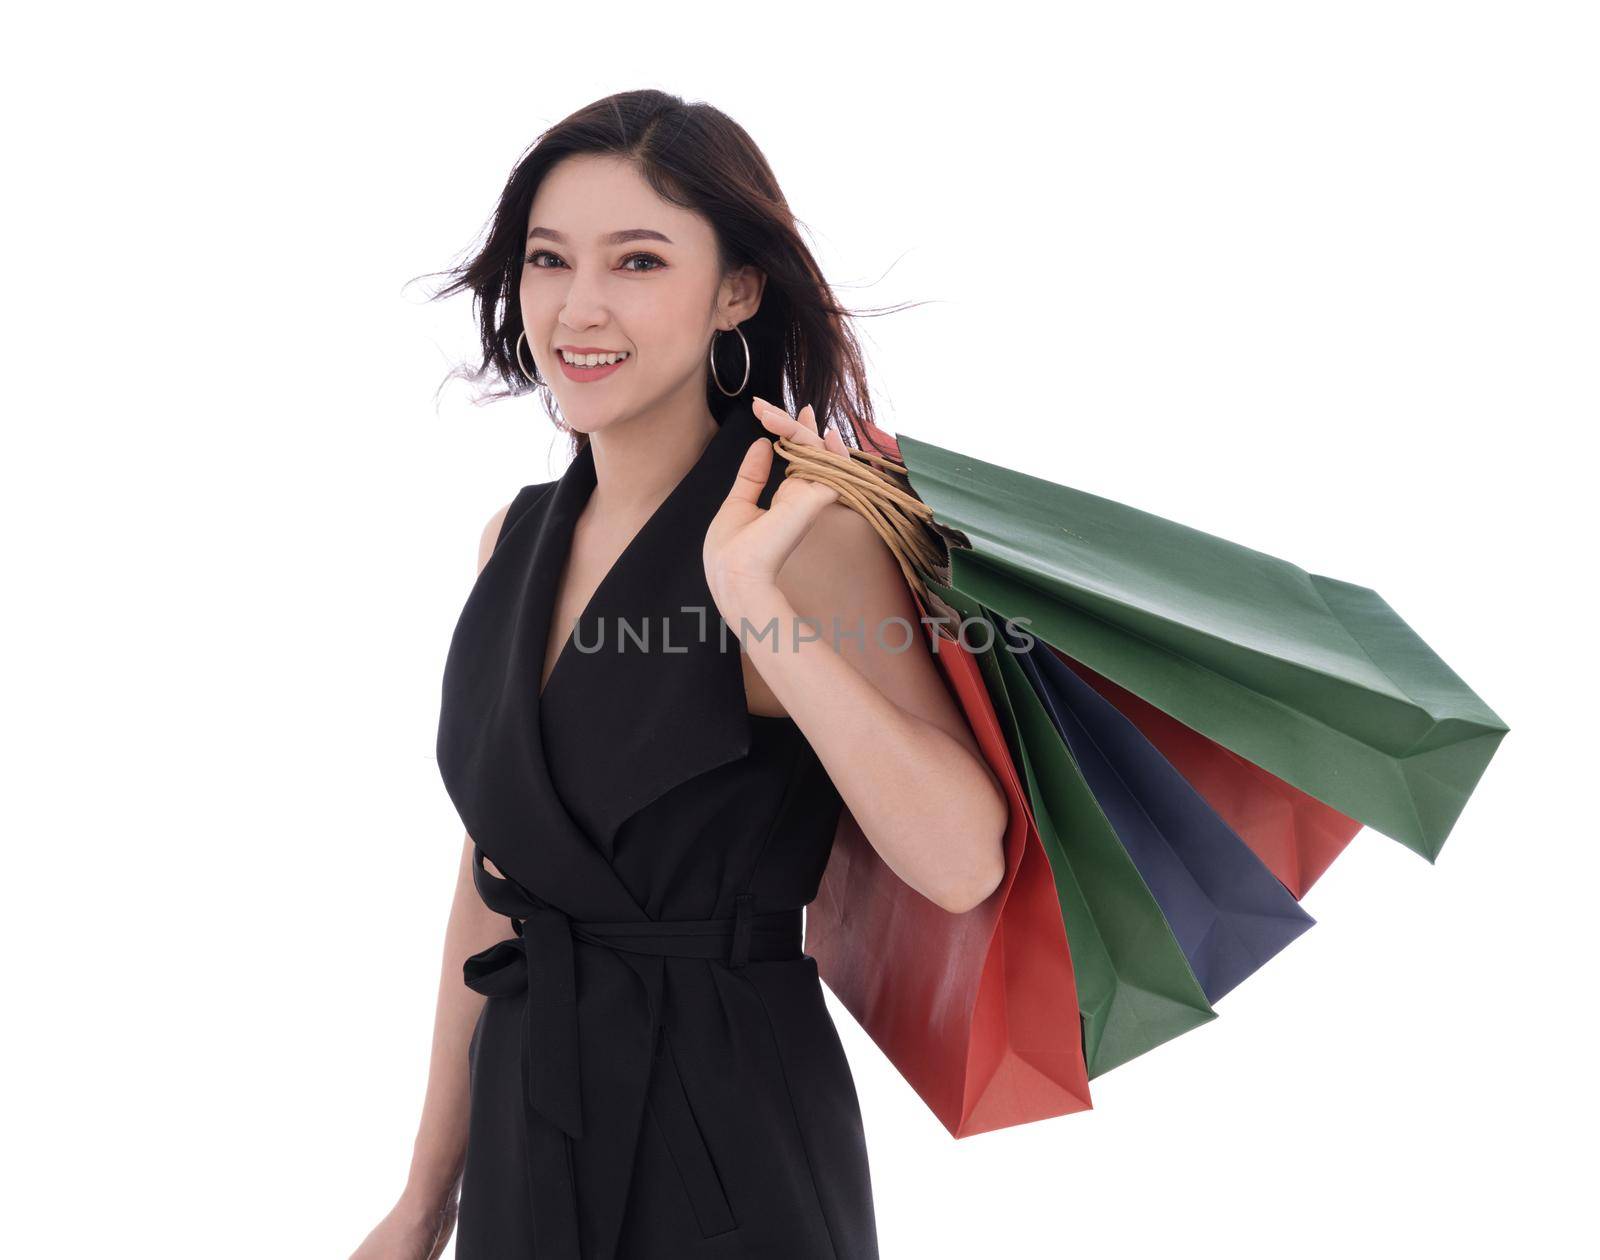 cheerful young woman holding shopping bag isolated on a white background